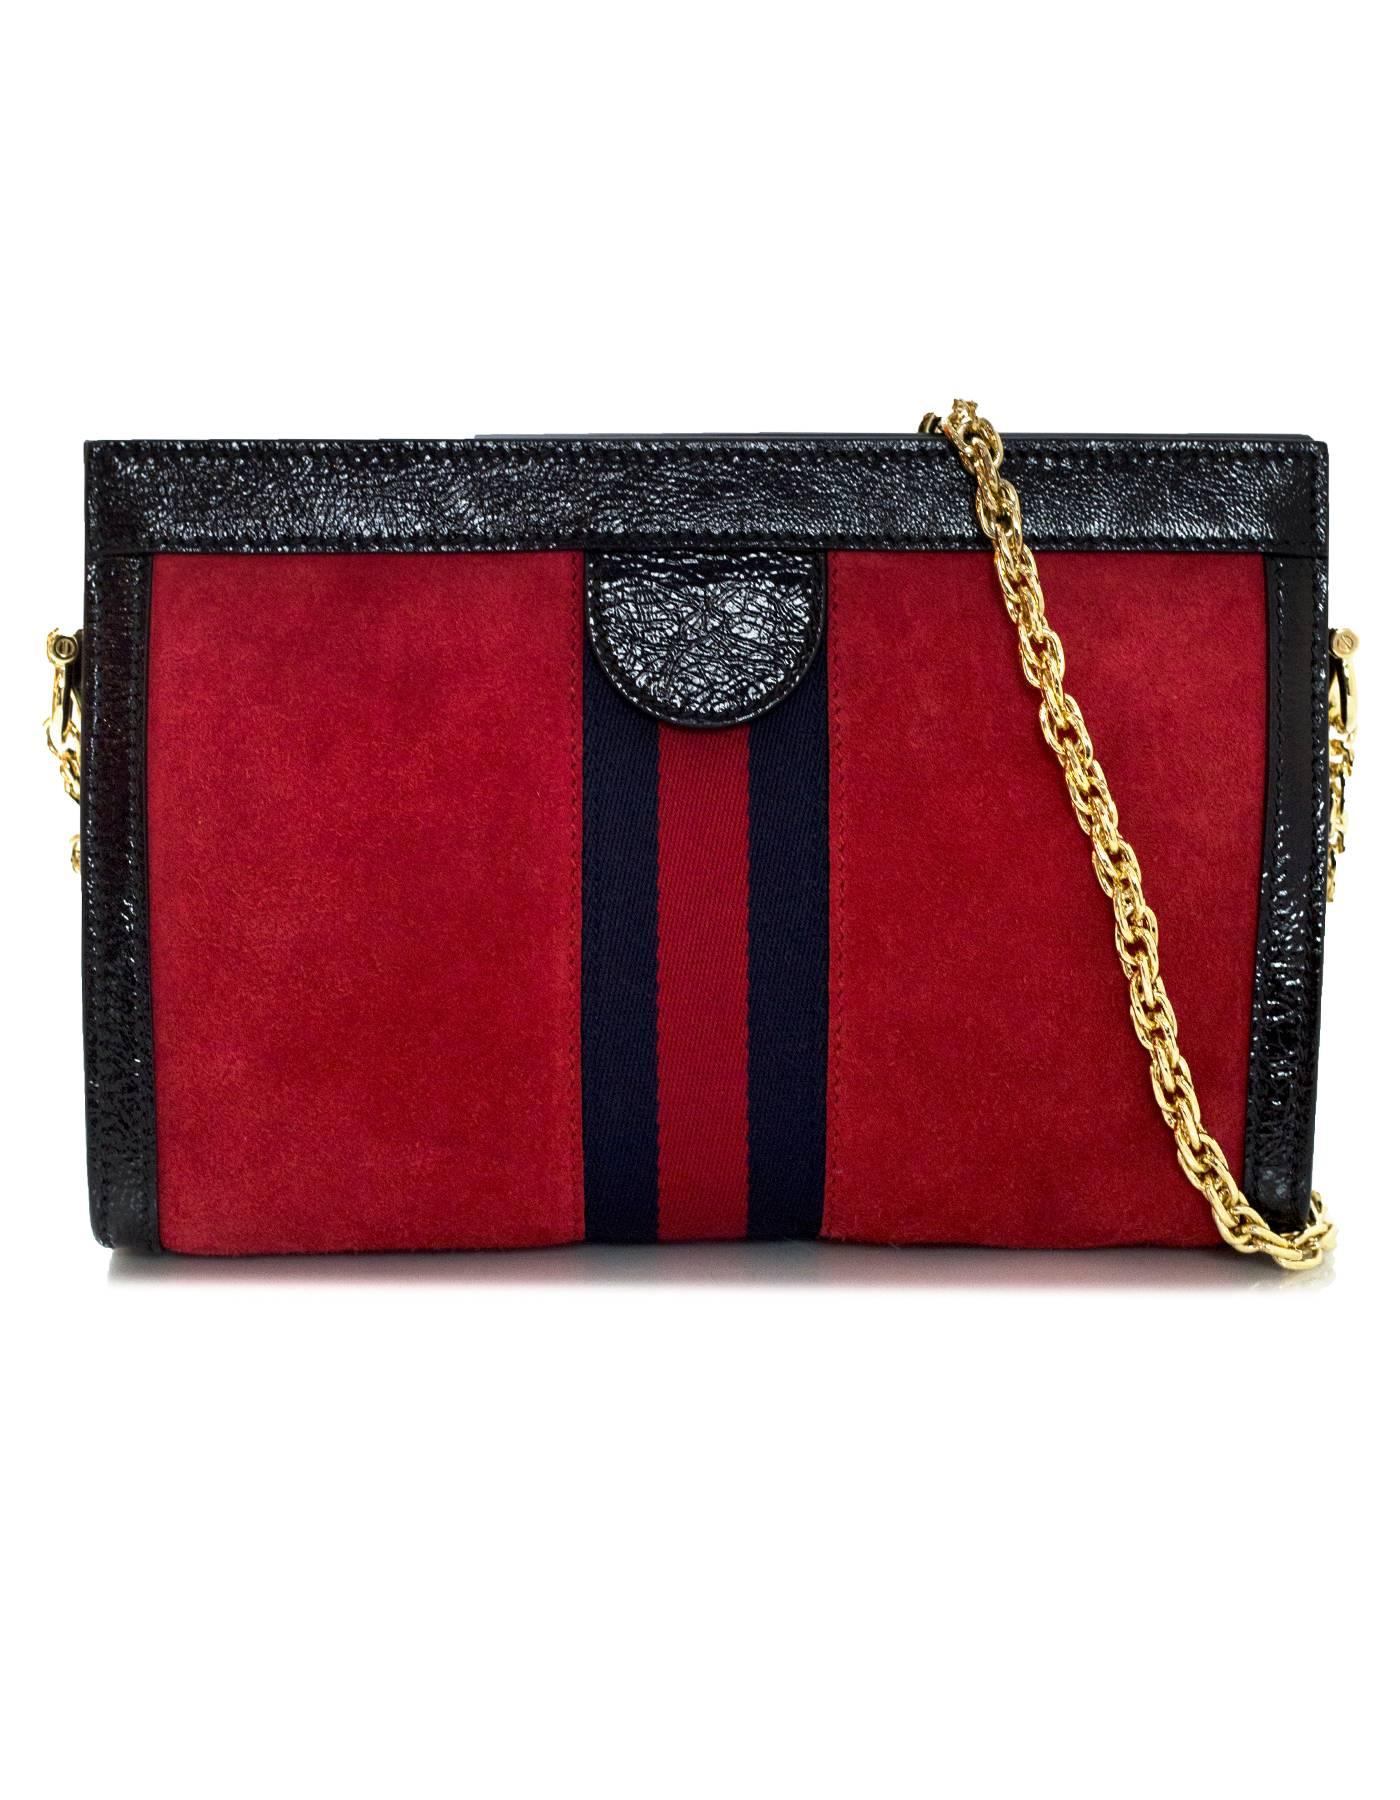 Women's or Men's Gucci NEW '18 Runway Red Suede & Black Patent Vintage Style Ophidia Bag w/ Chain